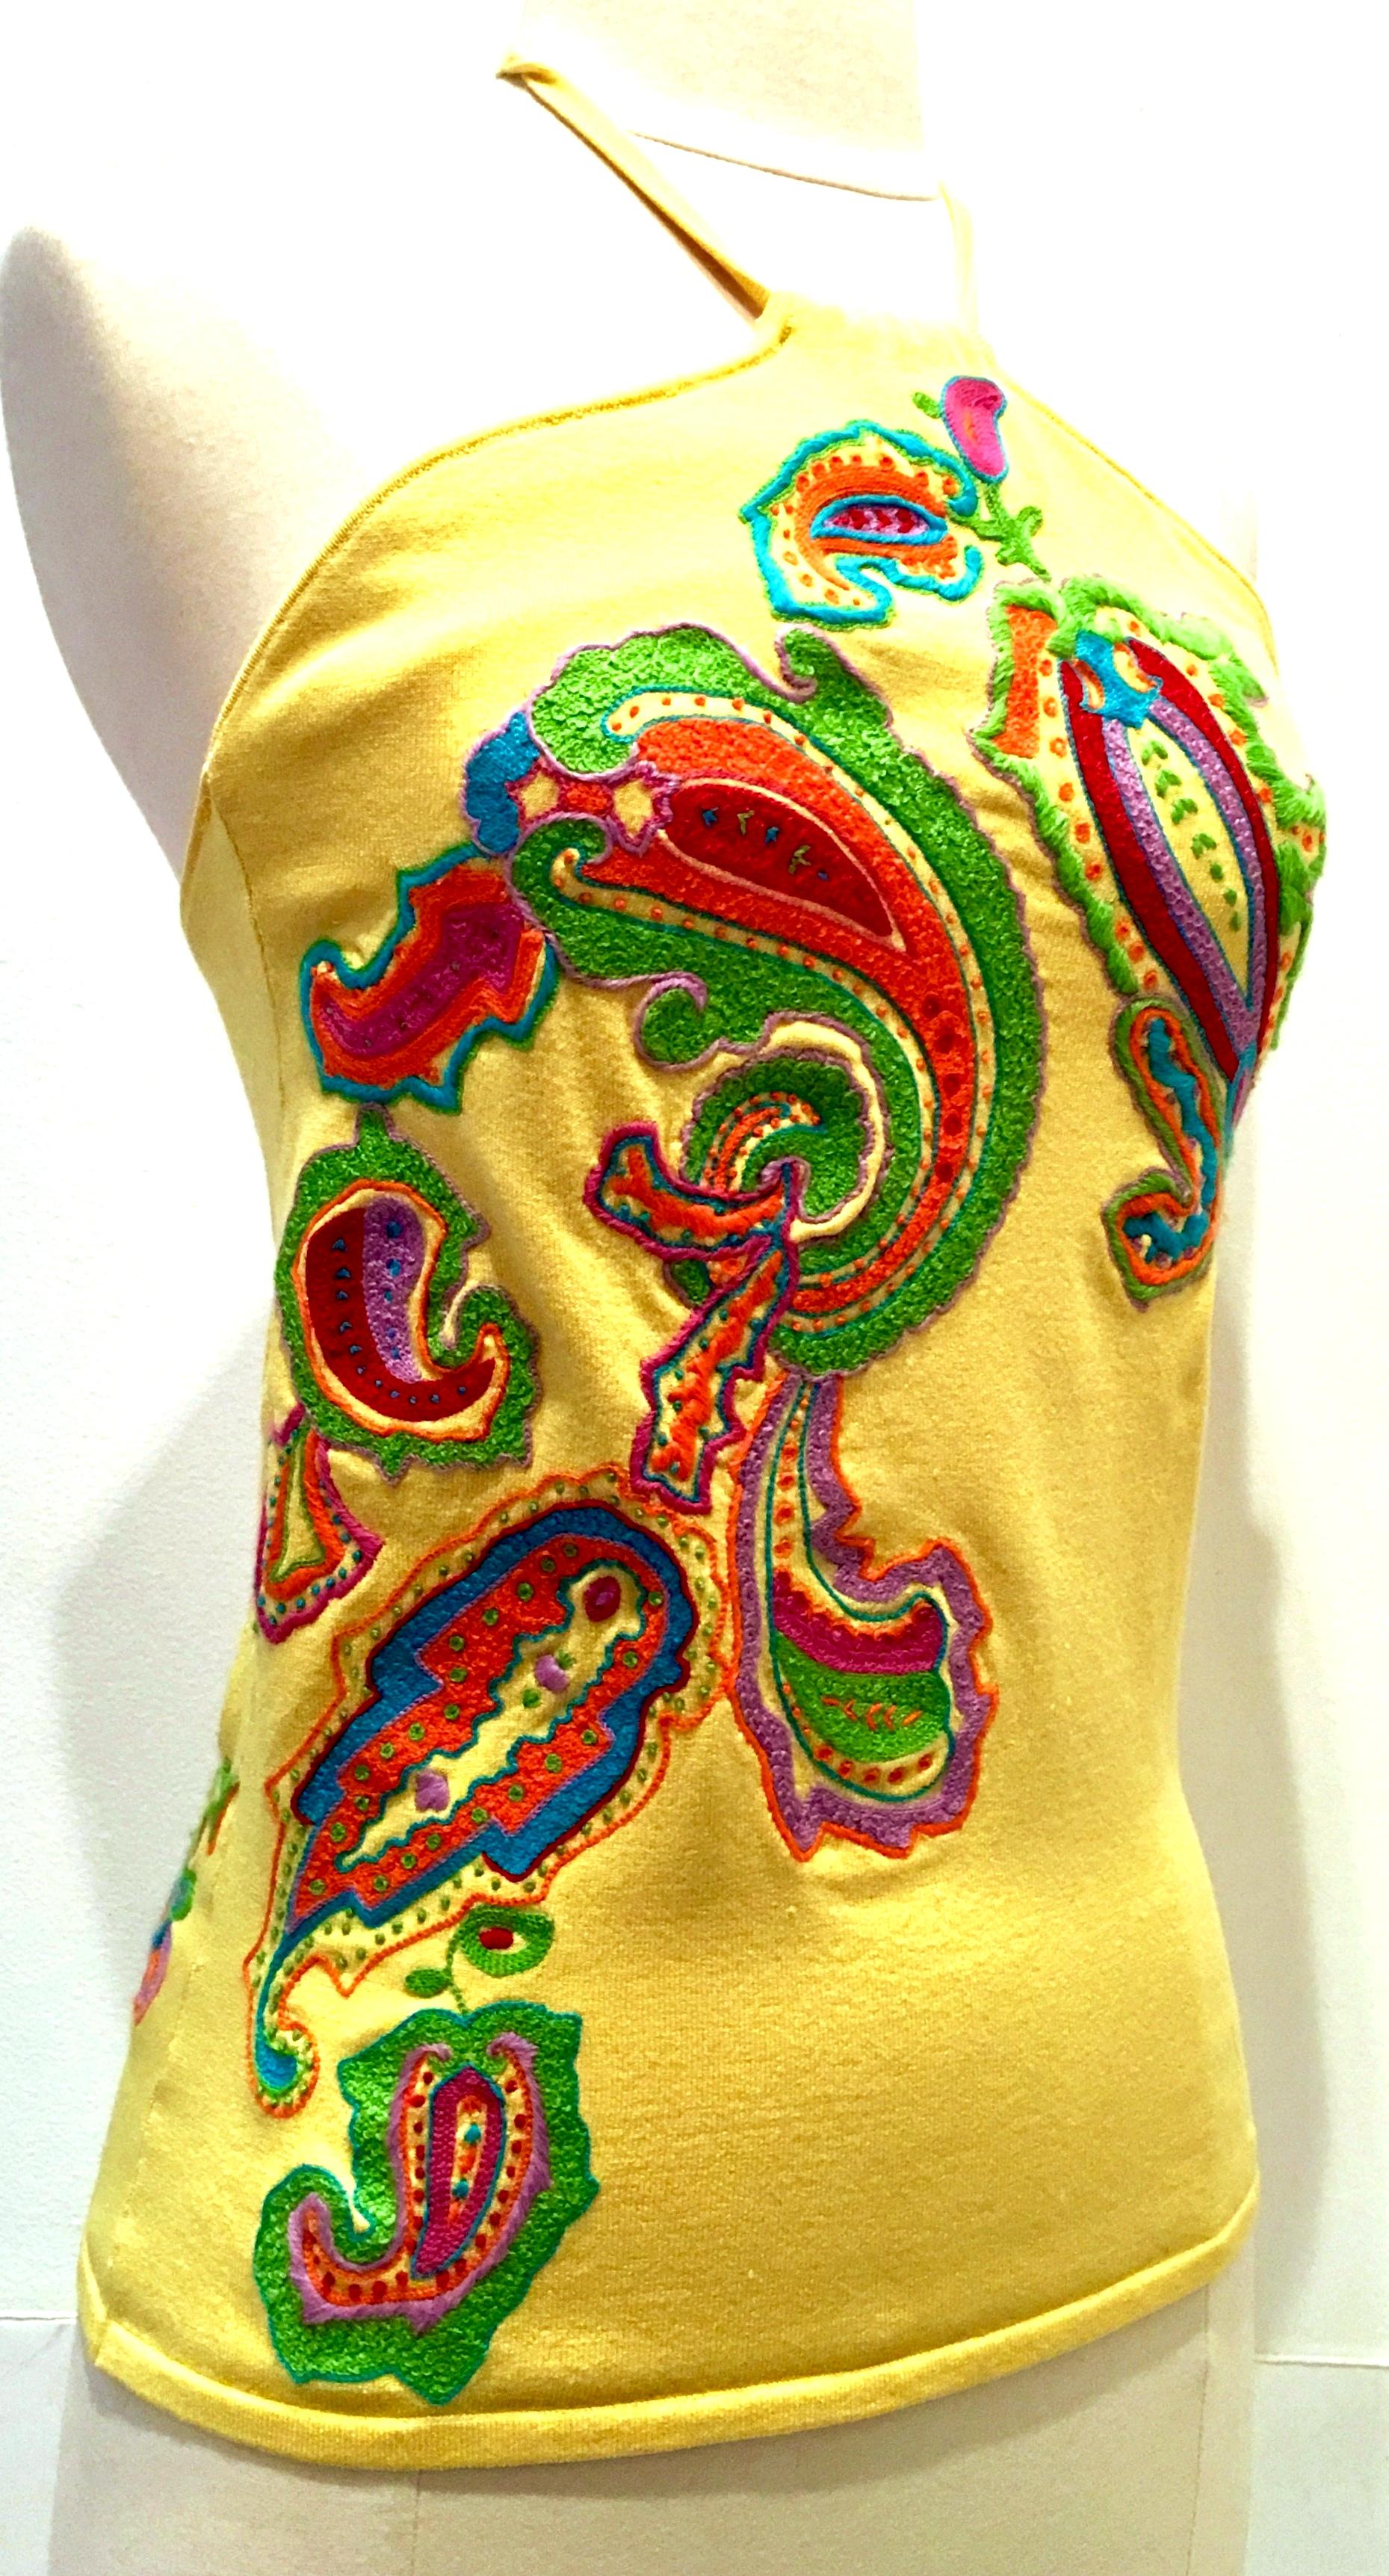 21st Century Silk Blend Bright Yellow Paisley Embroidery Halter Top By, Ralph Lauren. This like new silk blend top features a vivid multi colored embroidery applique pattern both front and back and built in shelf bra. Maintains the original